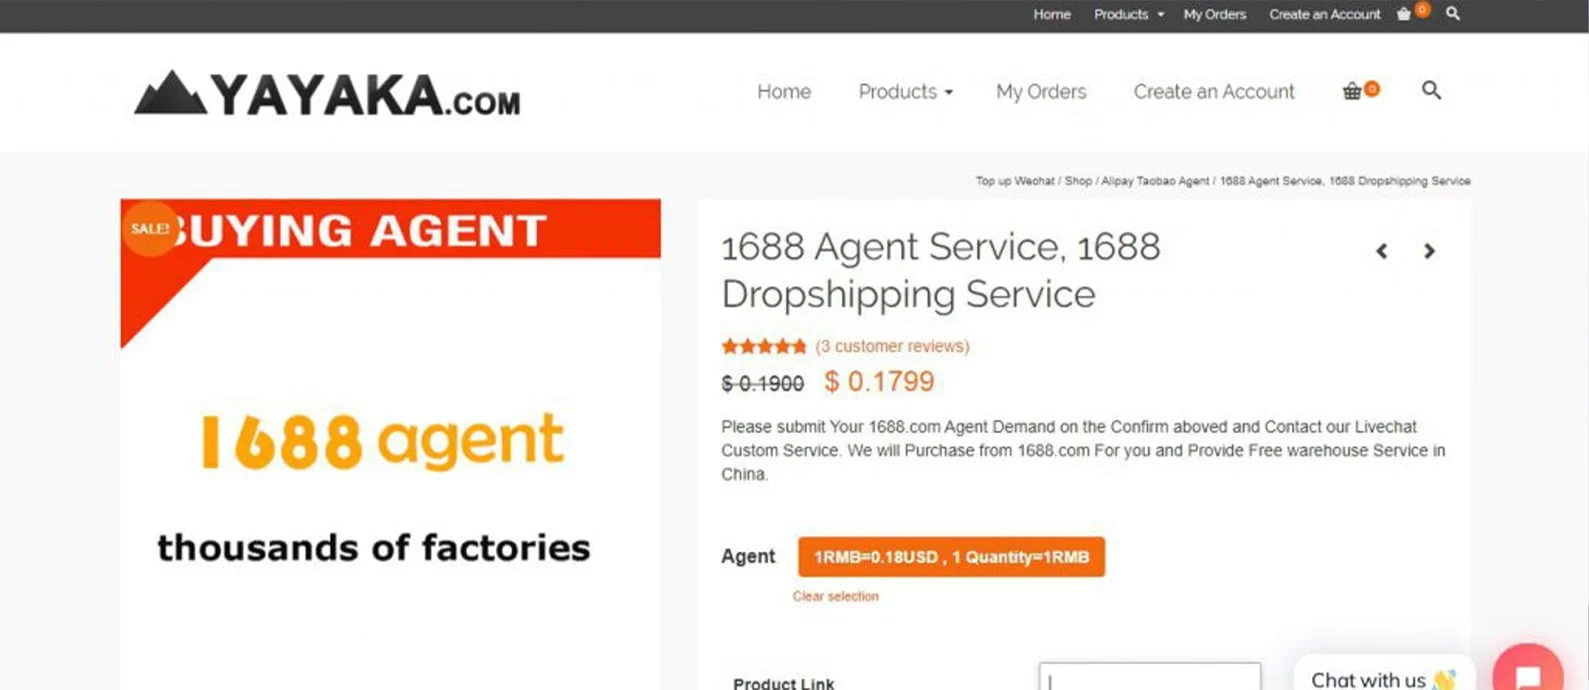 1688 agents enables foreigners to buy from 1688.